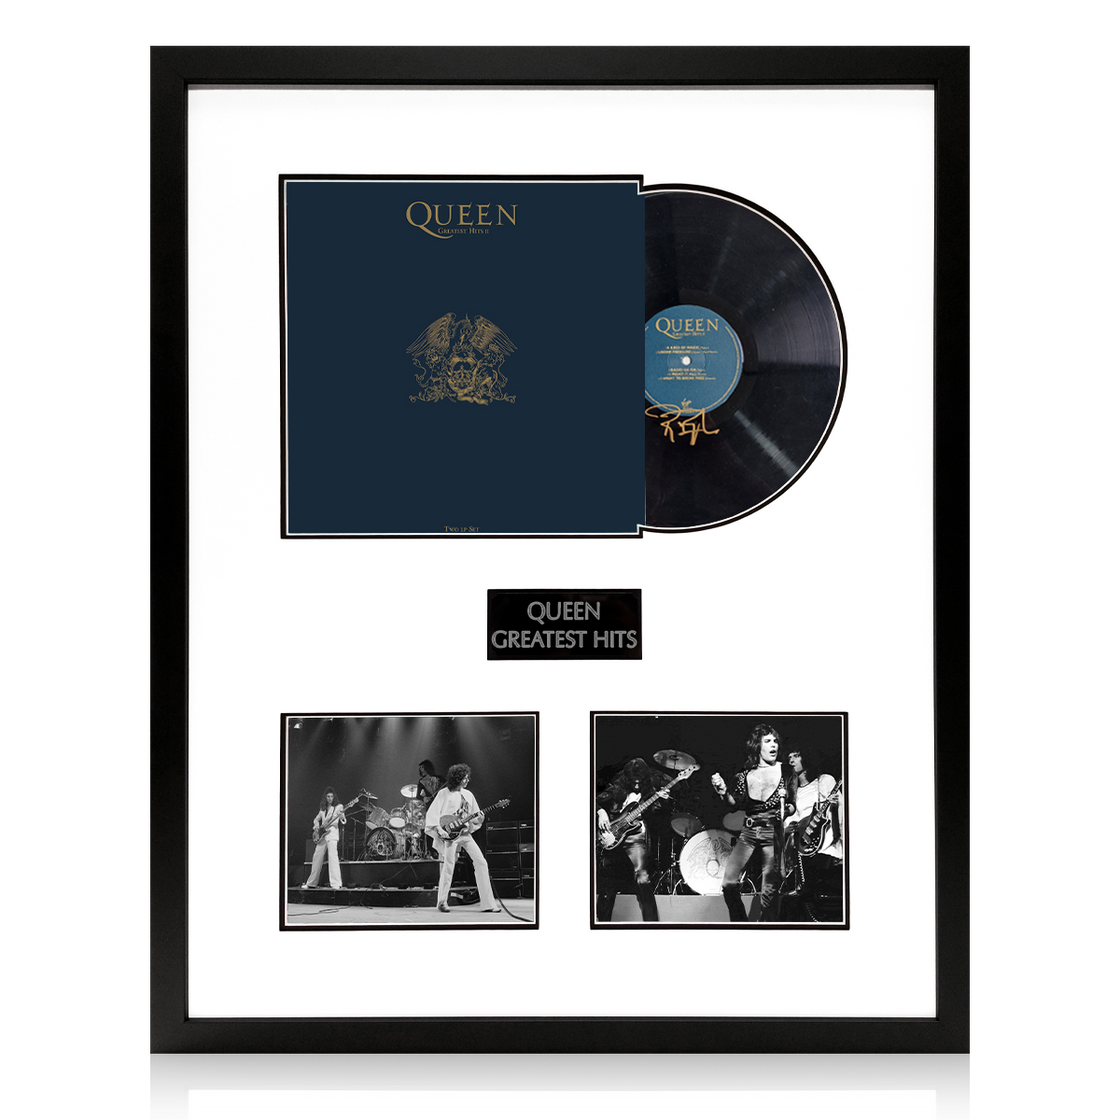 Roger Taylor Signed Queen LP Display